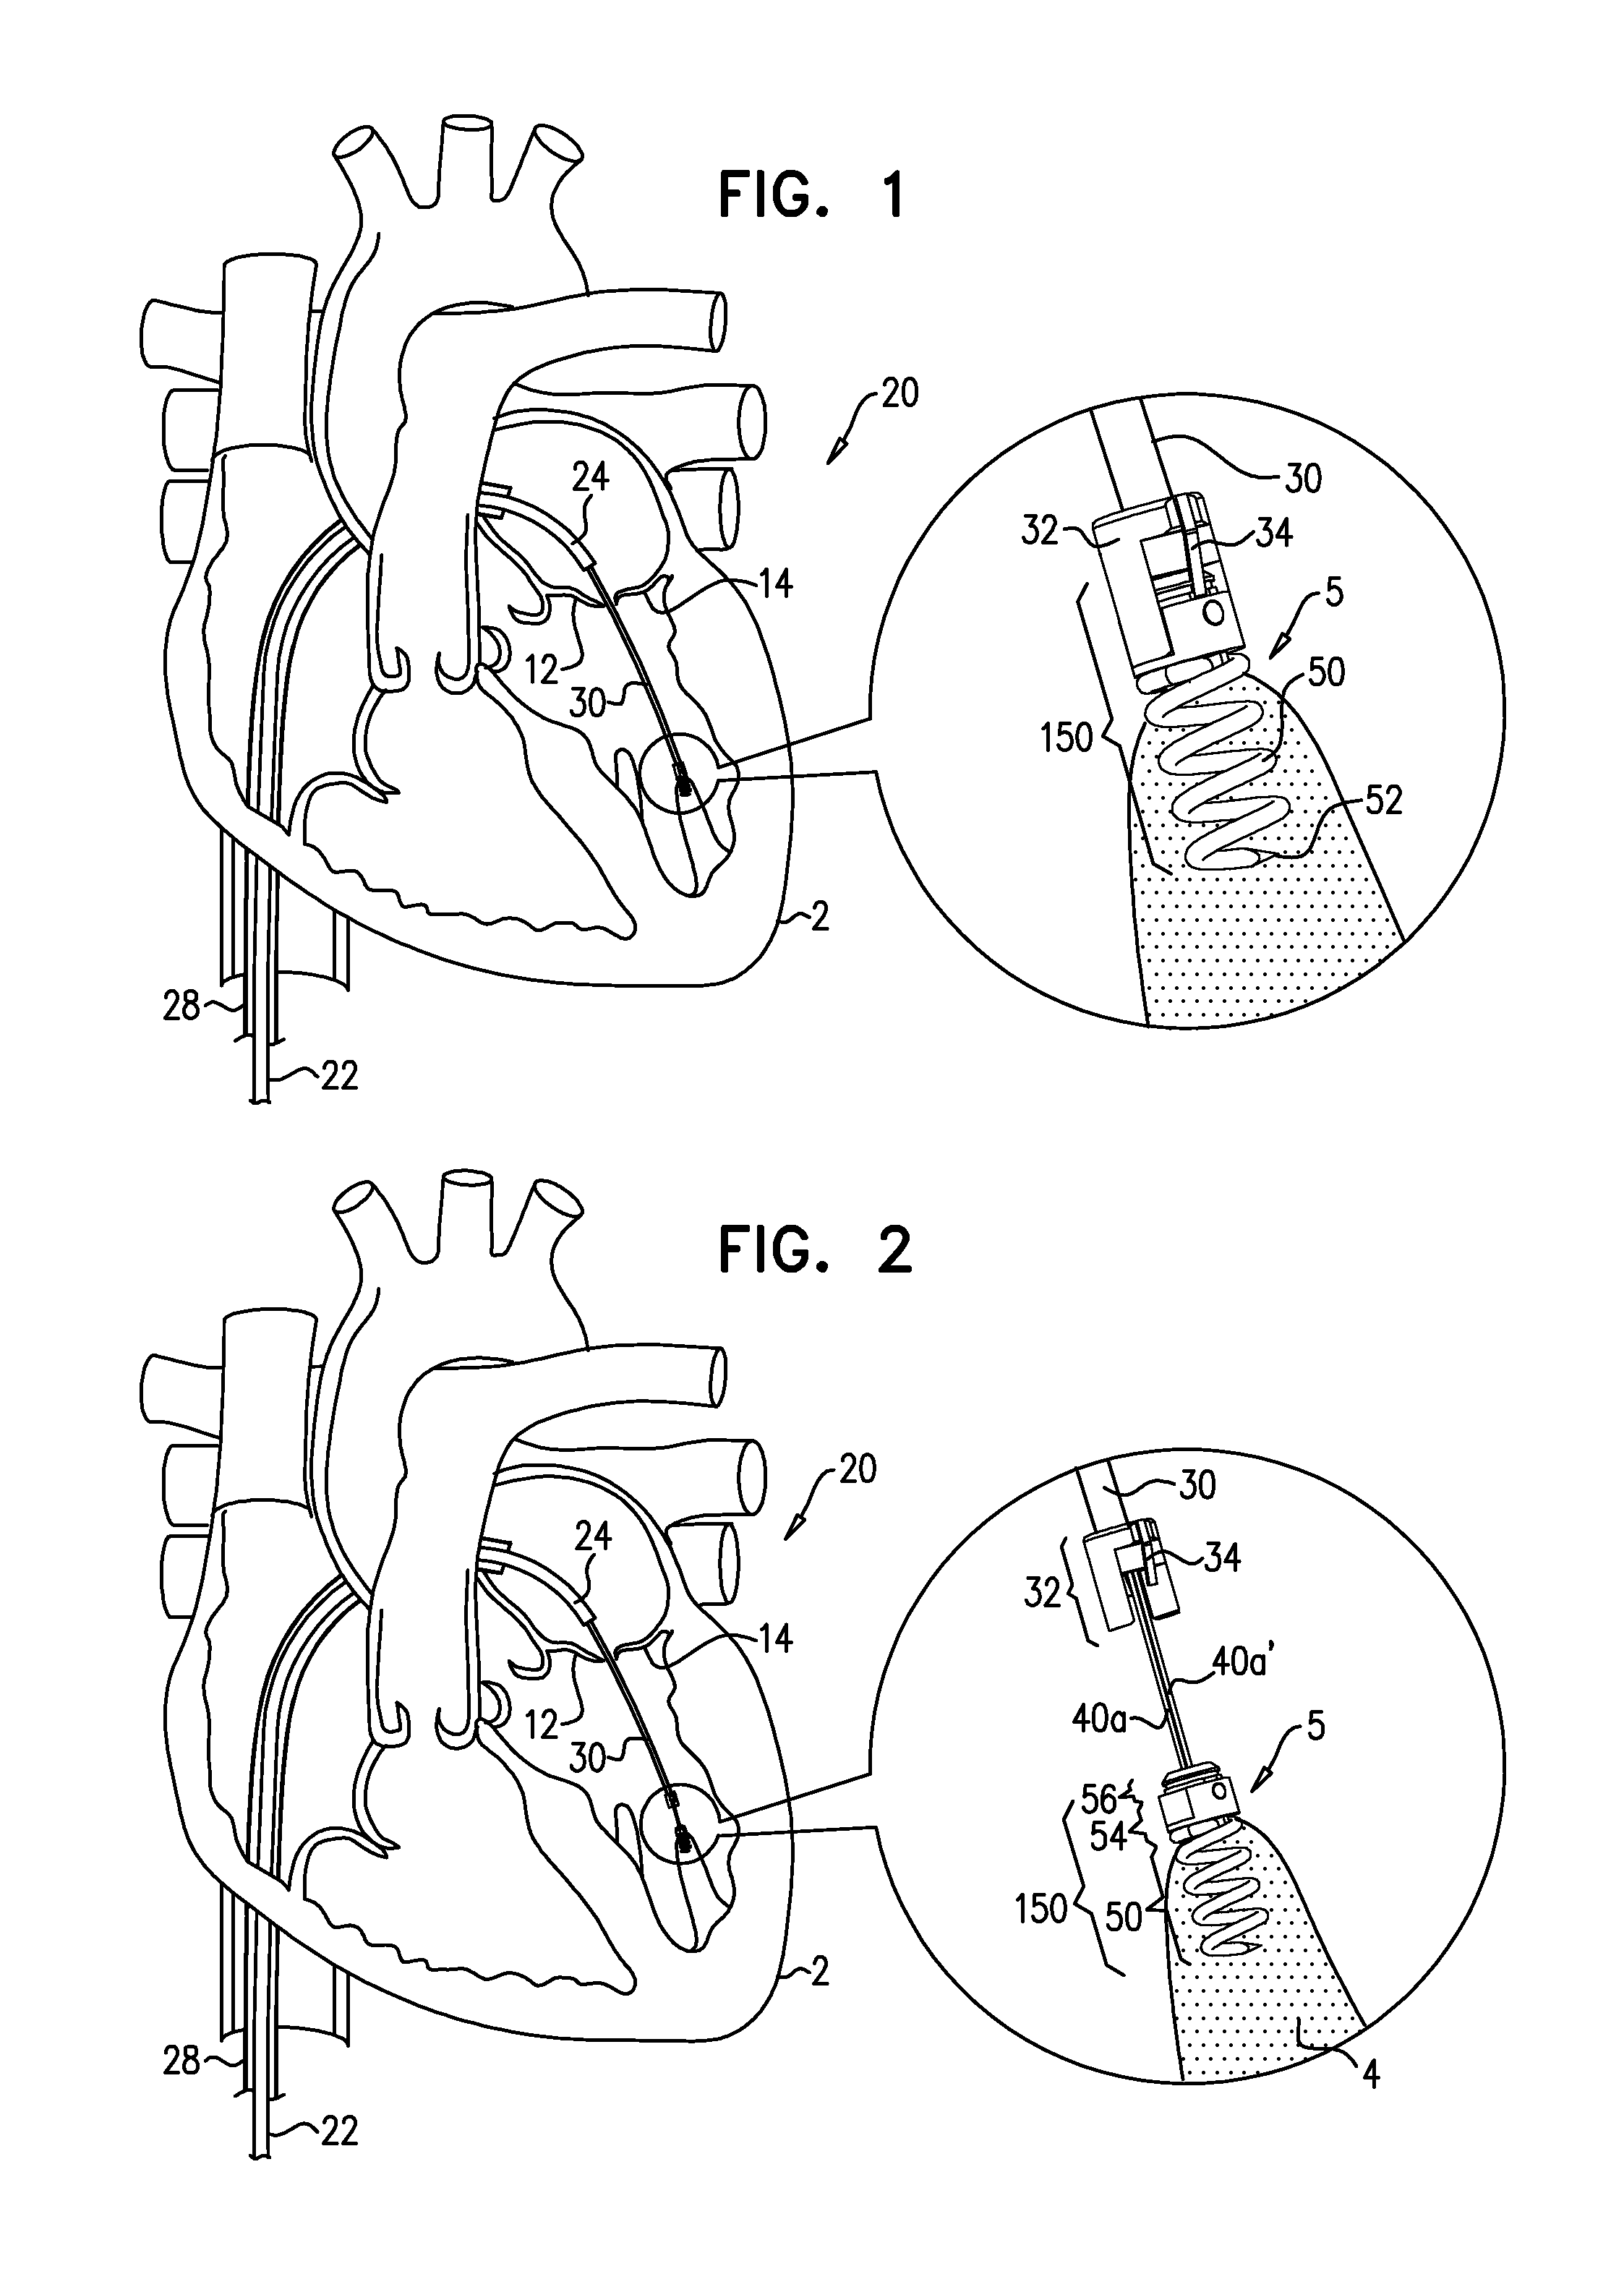 Apparatus for guide-wire based advancement of a rotation assembly